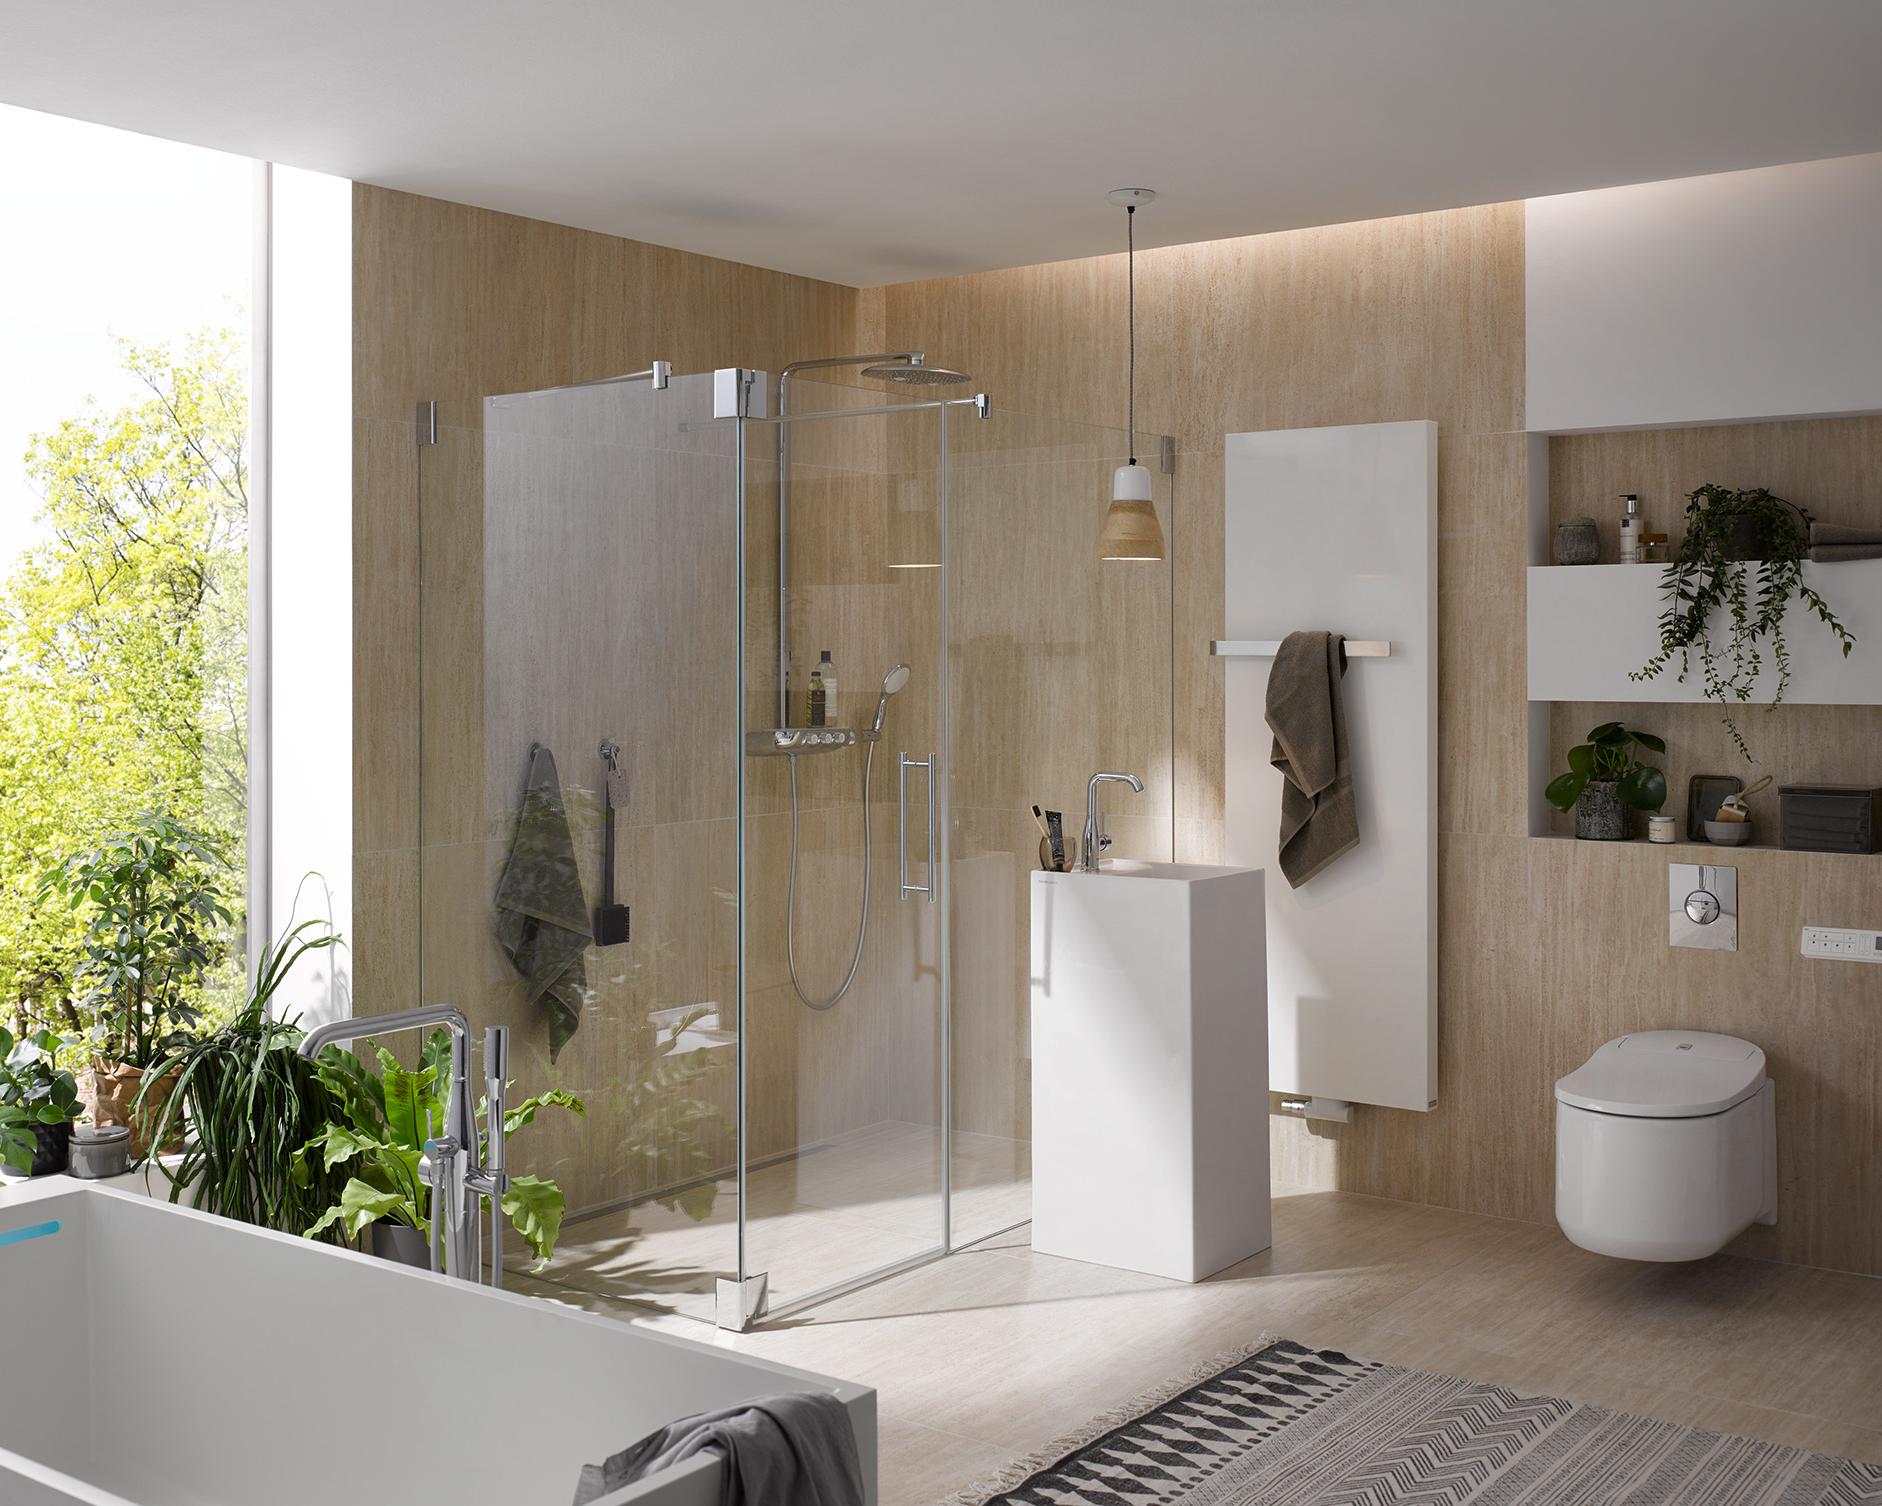 Kermi hinged shower enclosure, PASA single panel hinged door with fixed panel and side wall